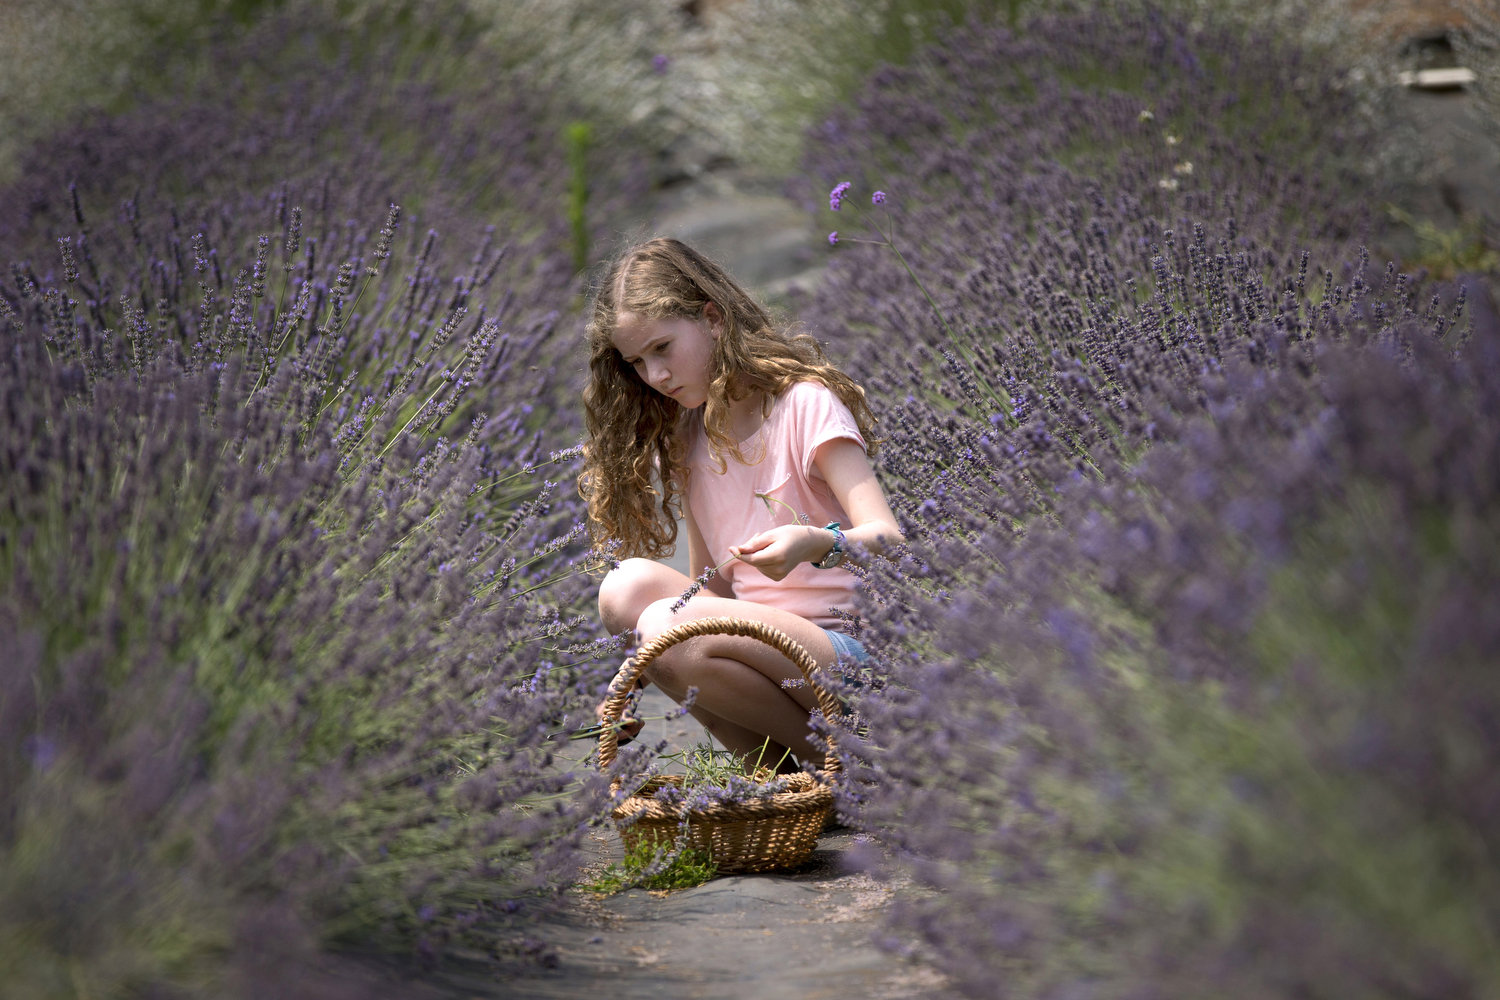 Ruby Stott of Portland, 10, collects lavender at the Helvetia Lavender Festival in Hillsboro.